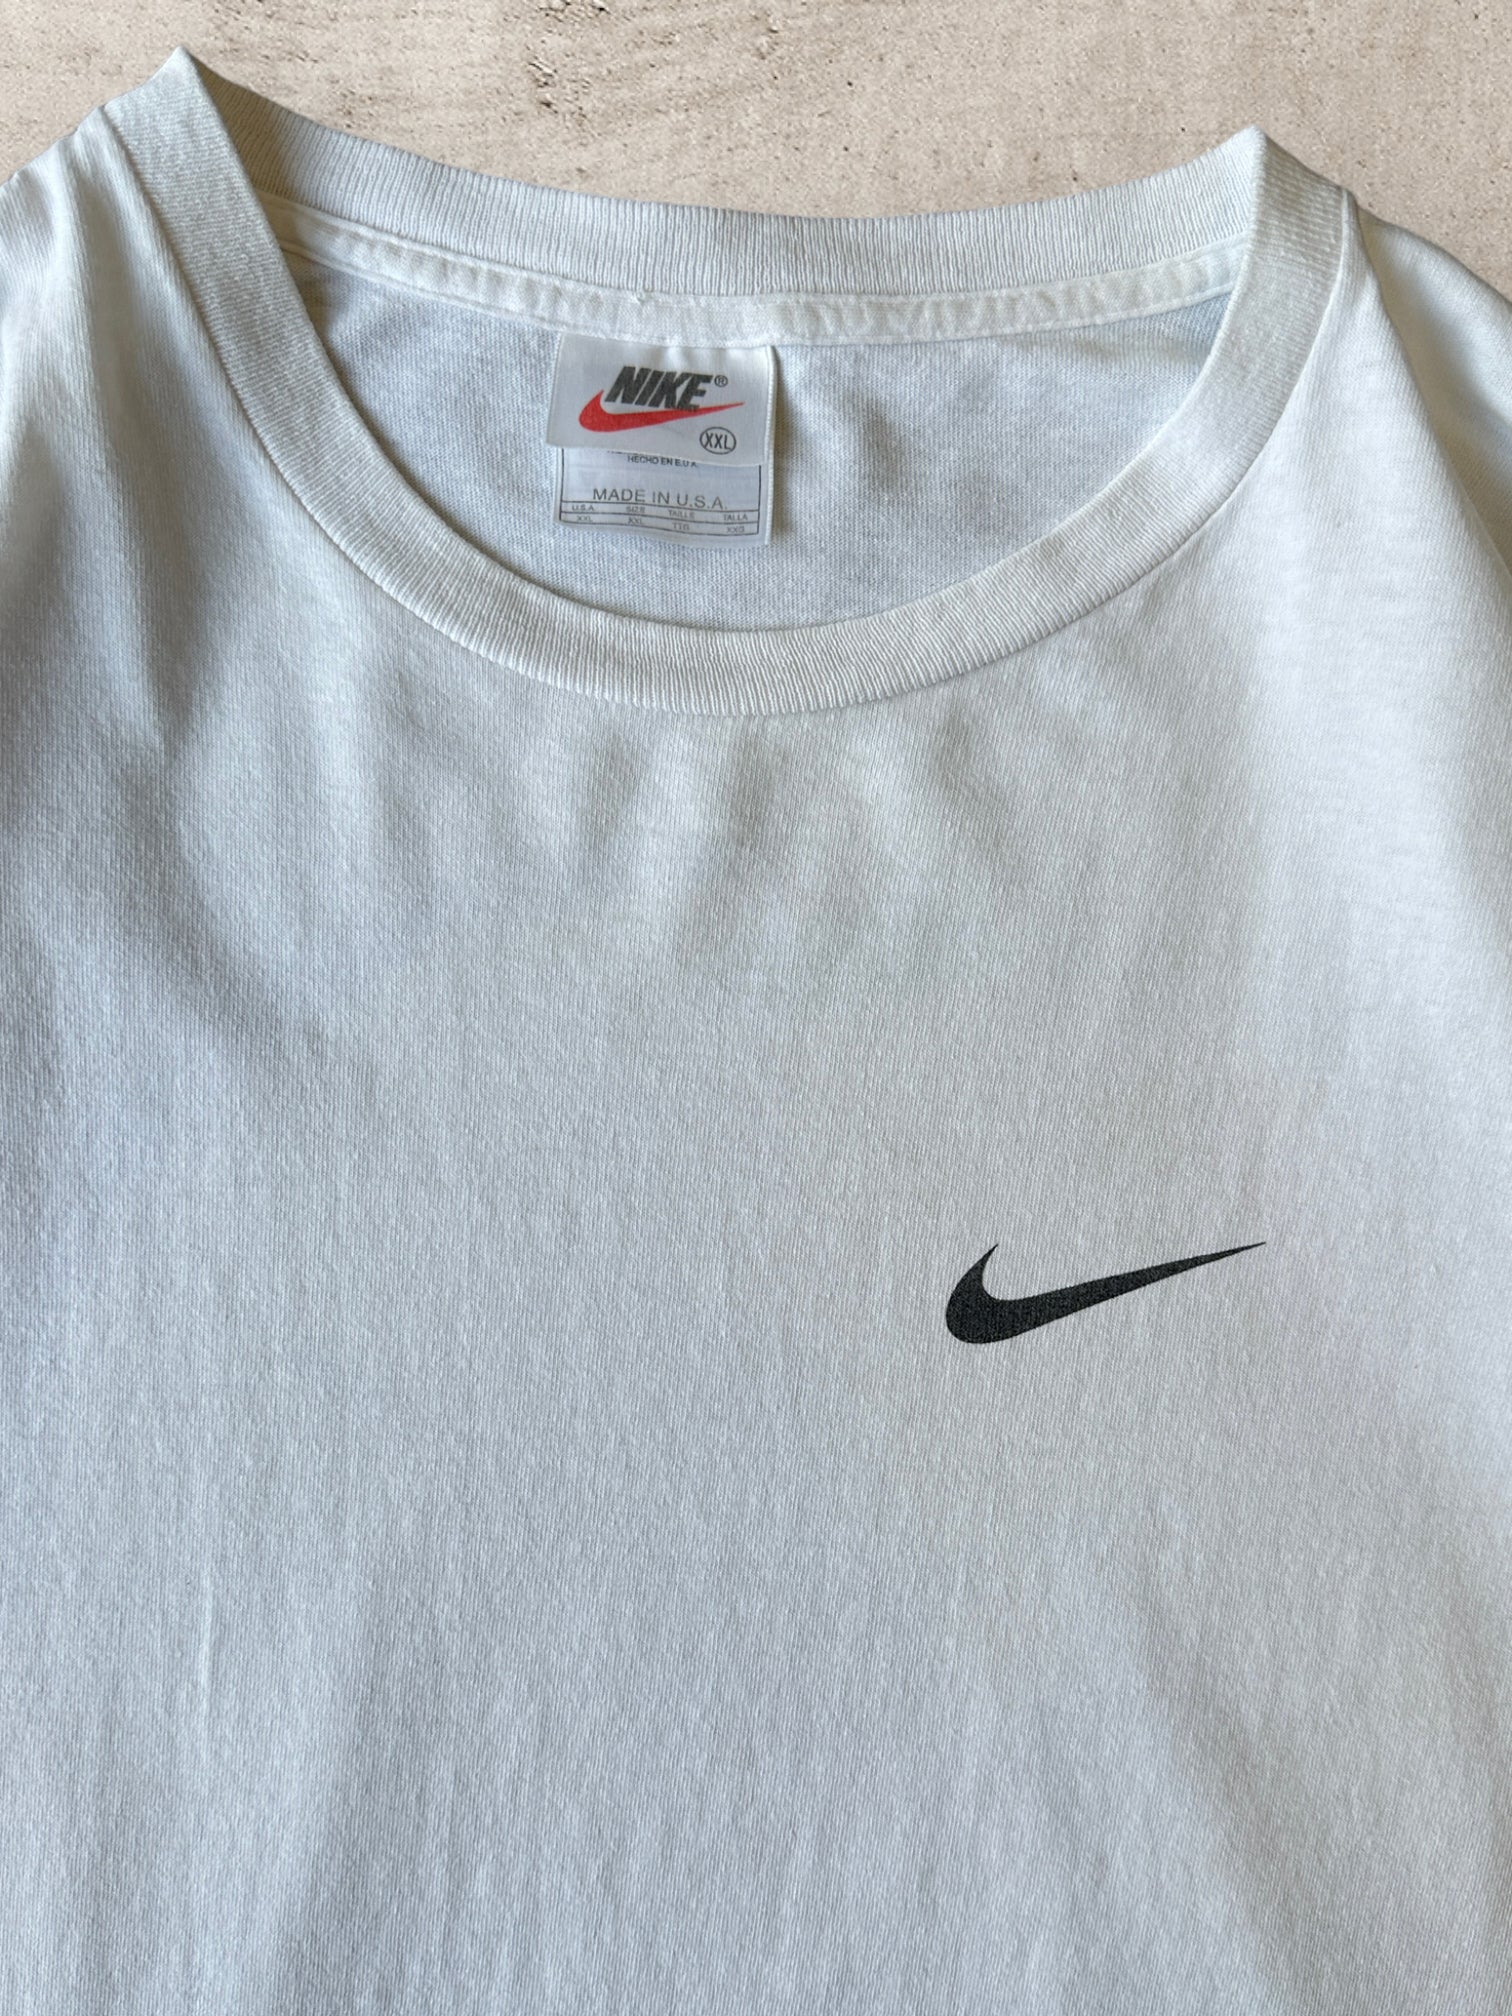 90s Nike Soccer Just Do It Graphic T-Shirt - XXL